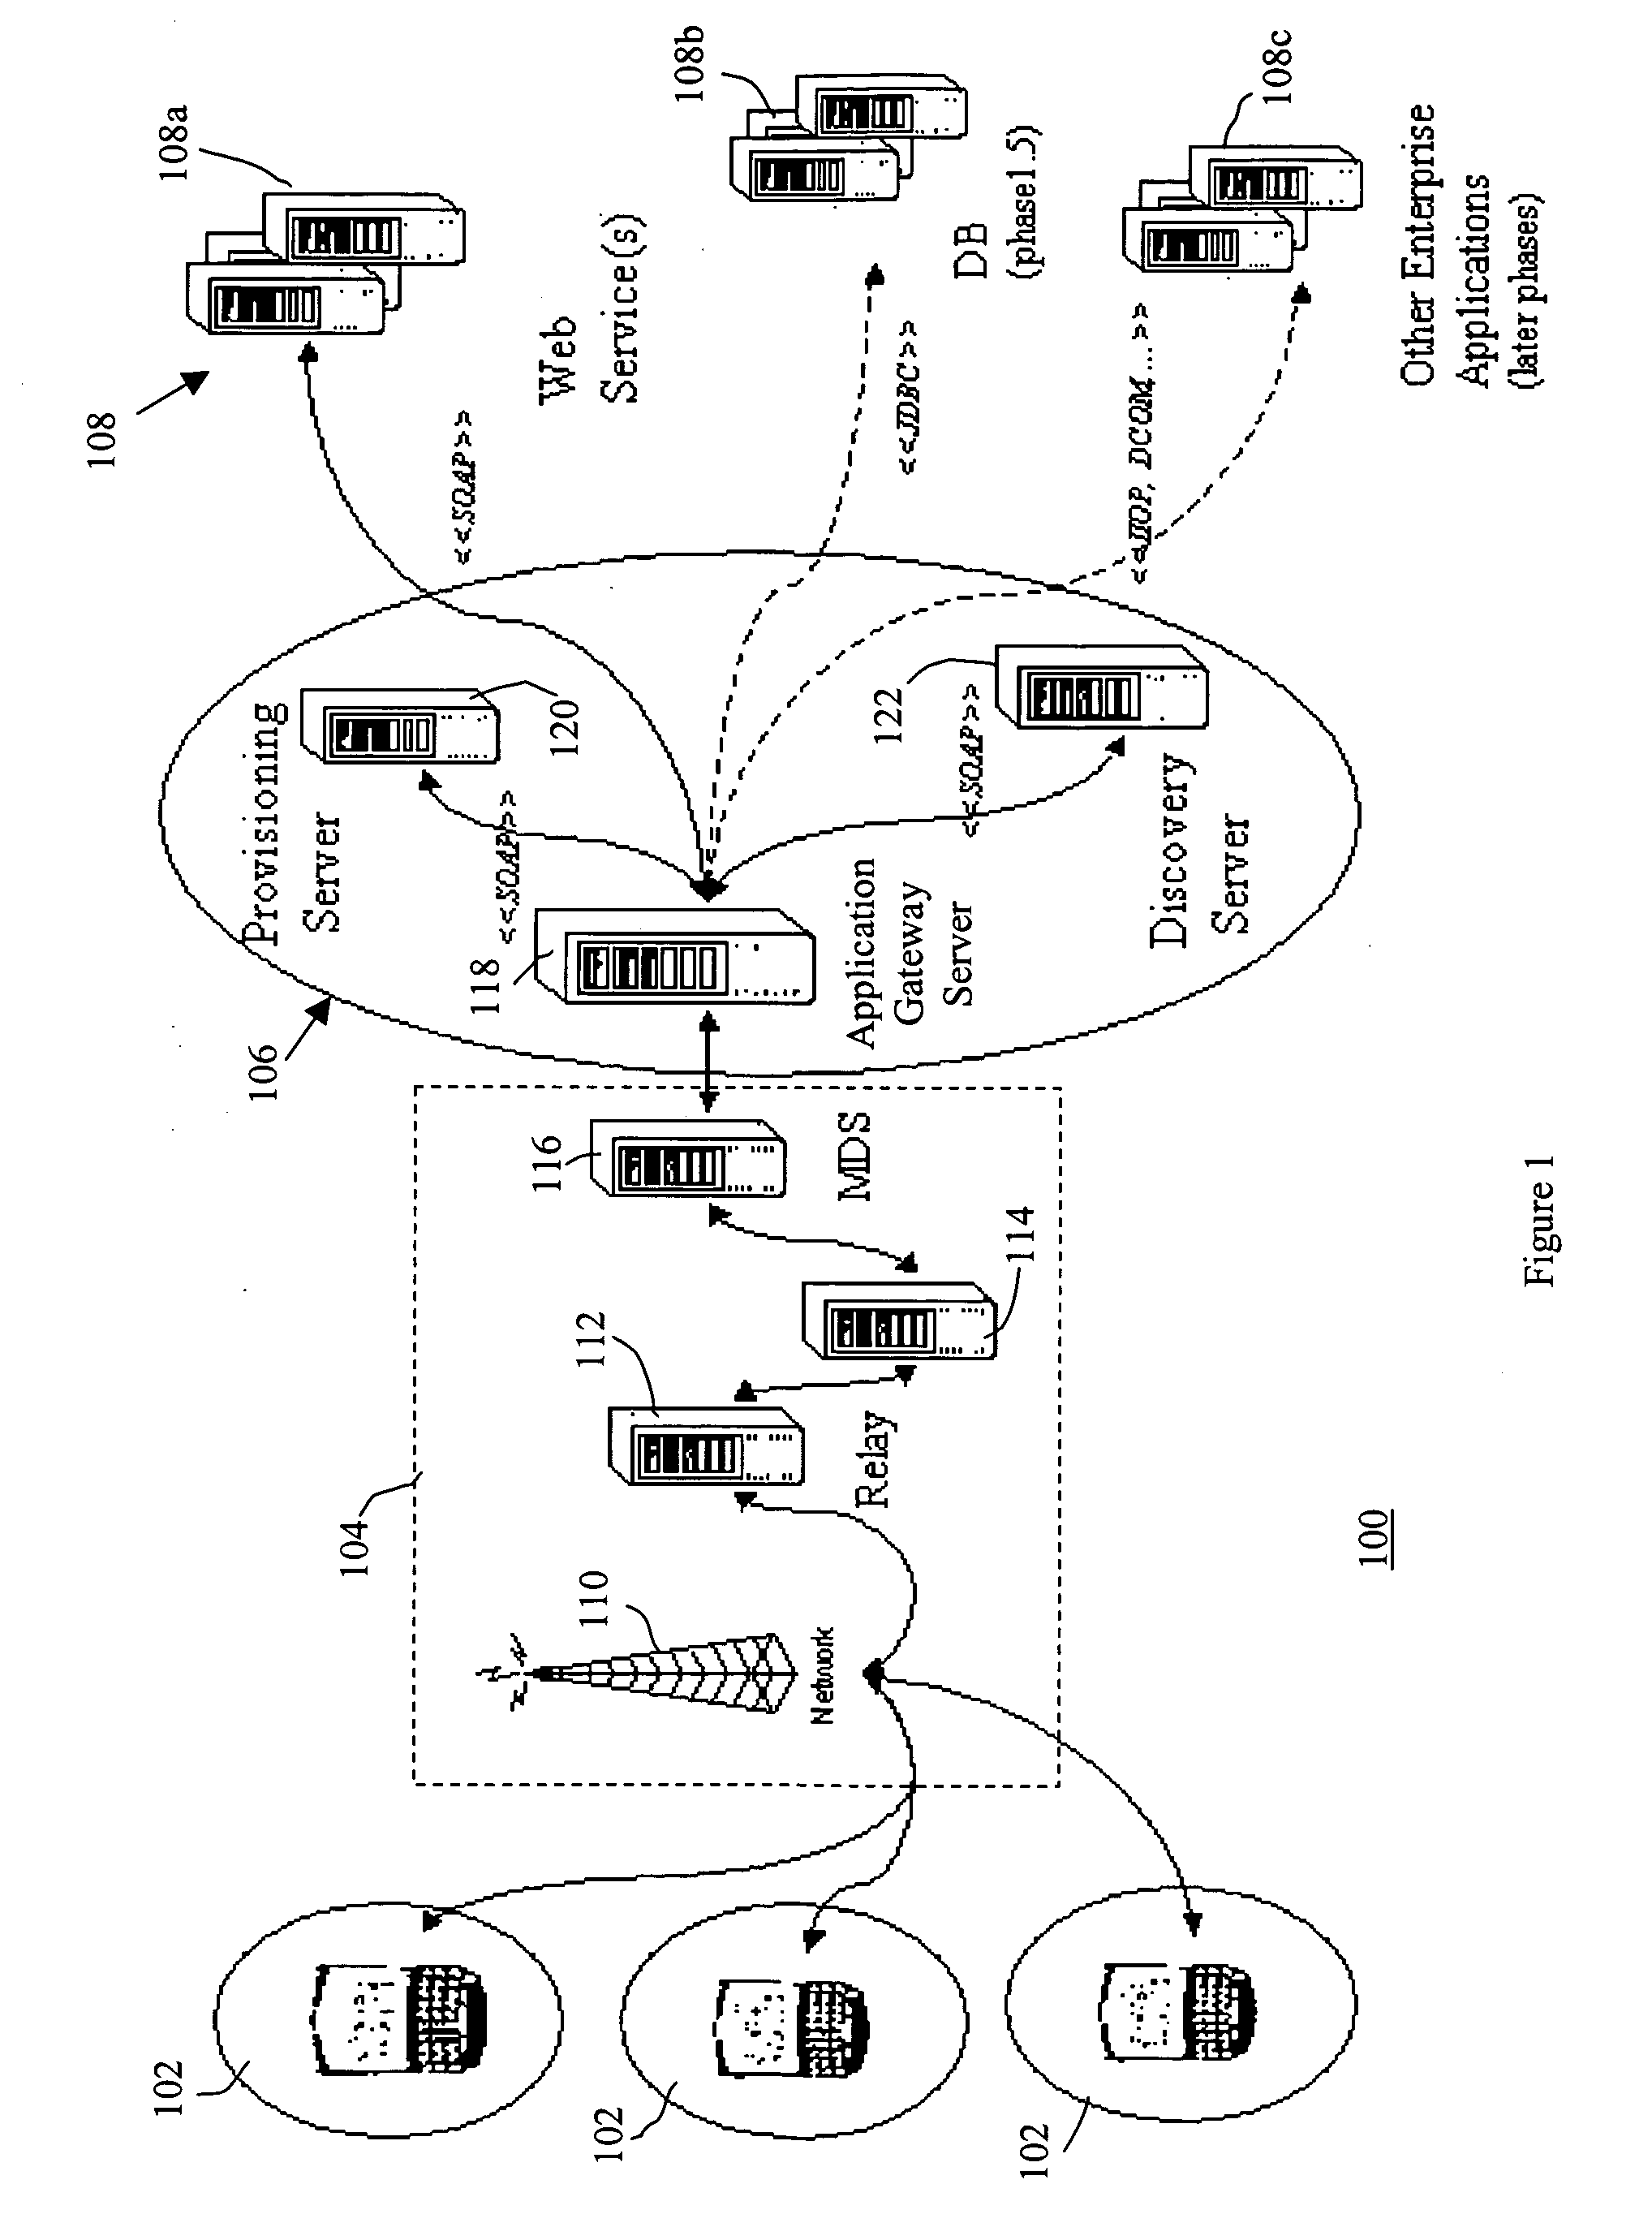 System and method for provisioning component applications